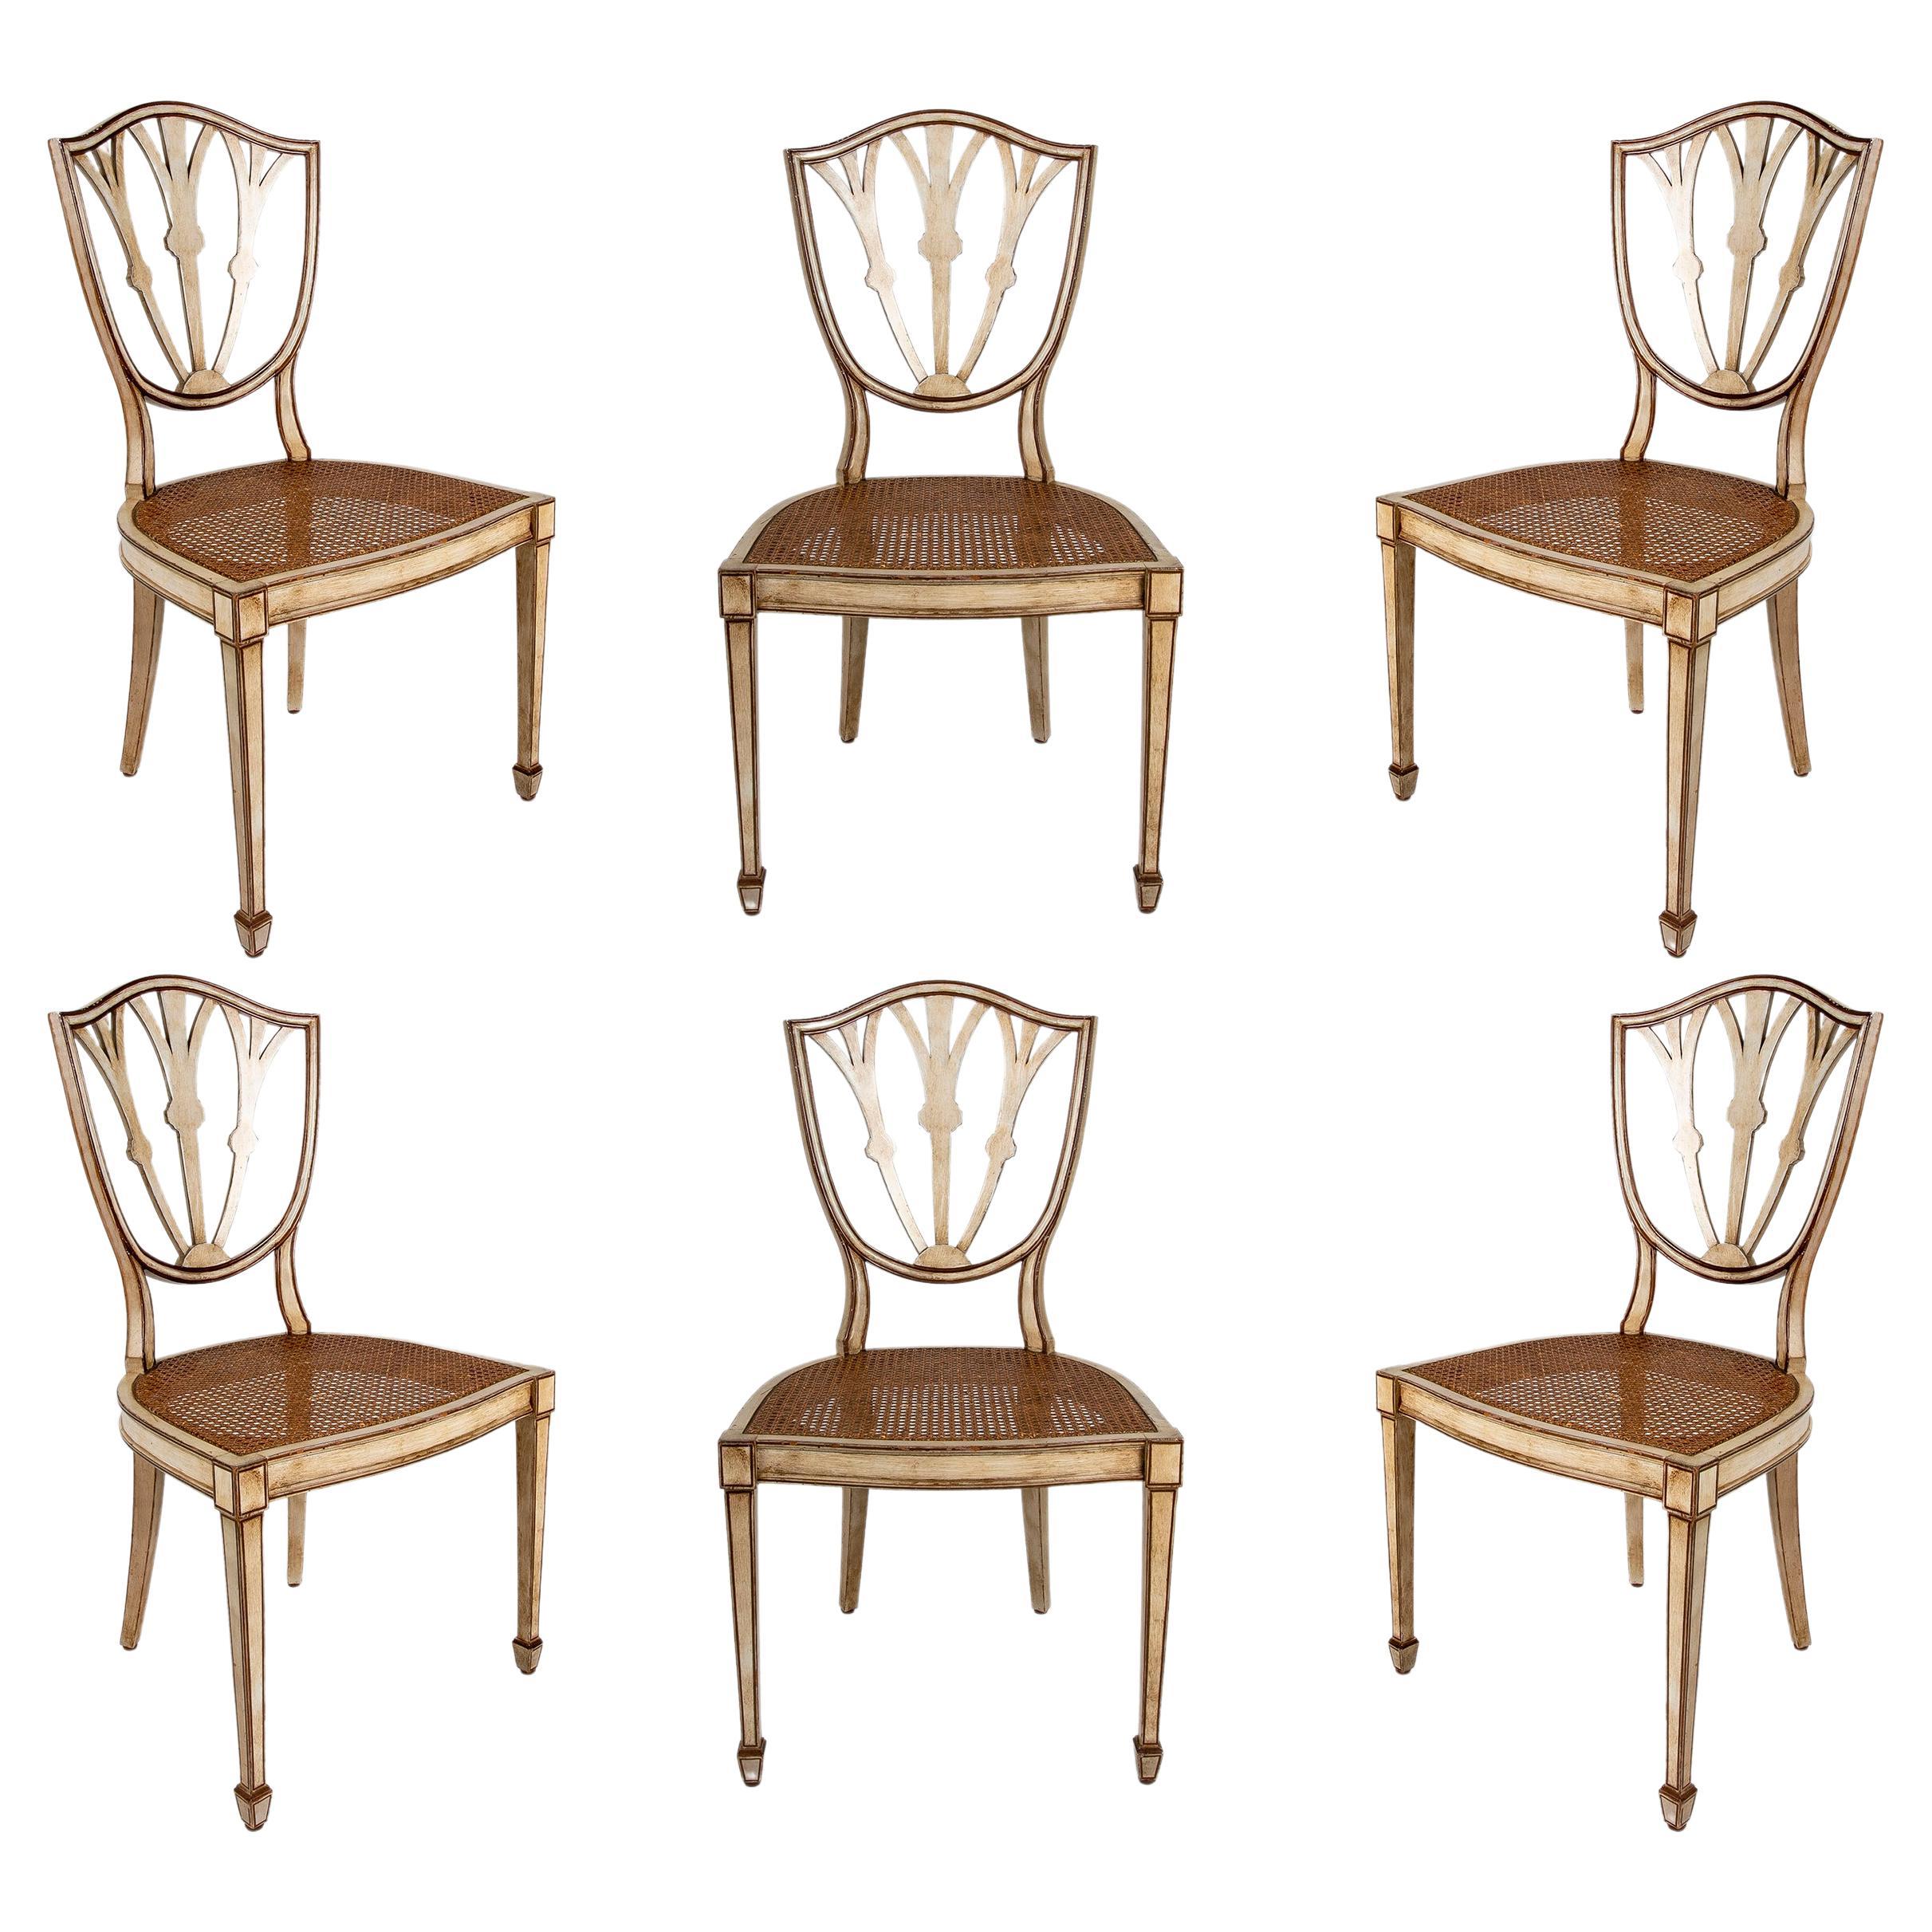 Set of six Wooden Chairs with Slatted Seats